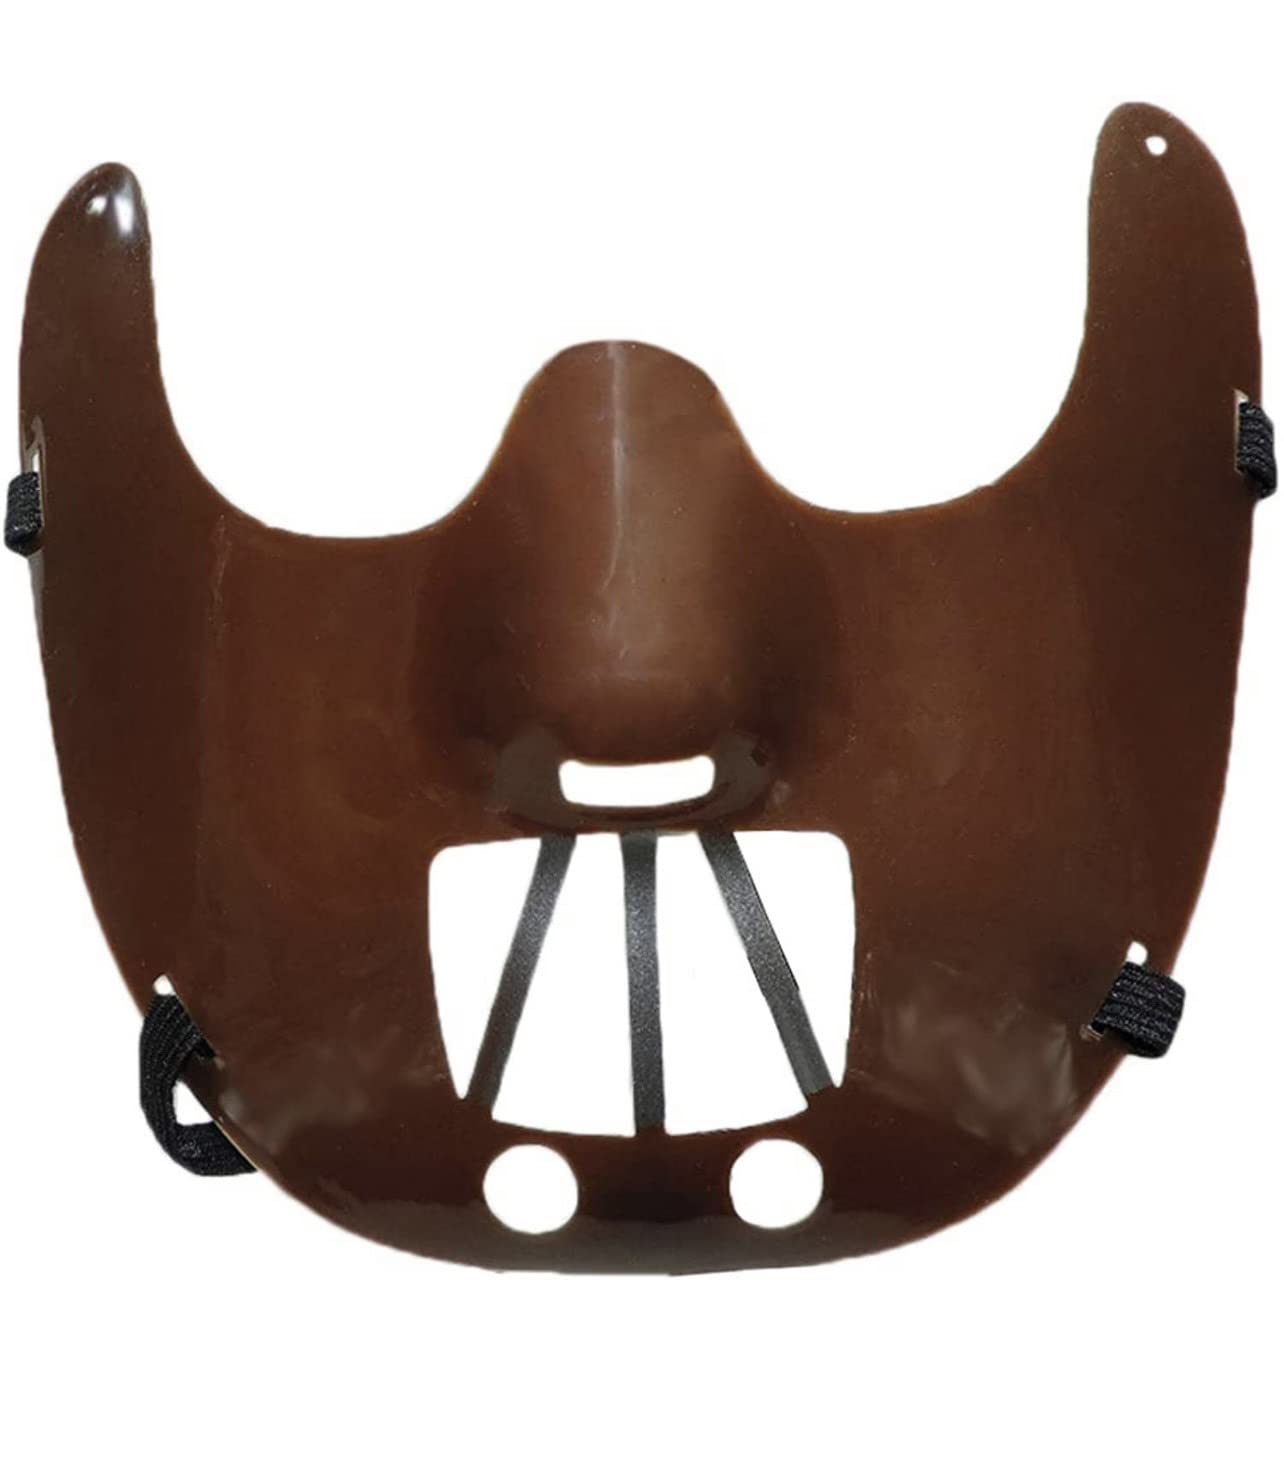 ''Cannibal Hannibal Plastic Restraint Costume Muzzle Mask w/Elastic Strap - For Cos Play, HALLOWEEN, 